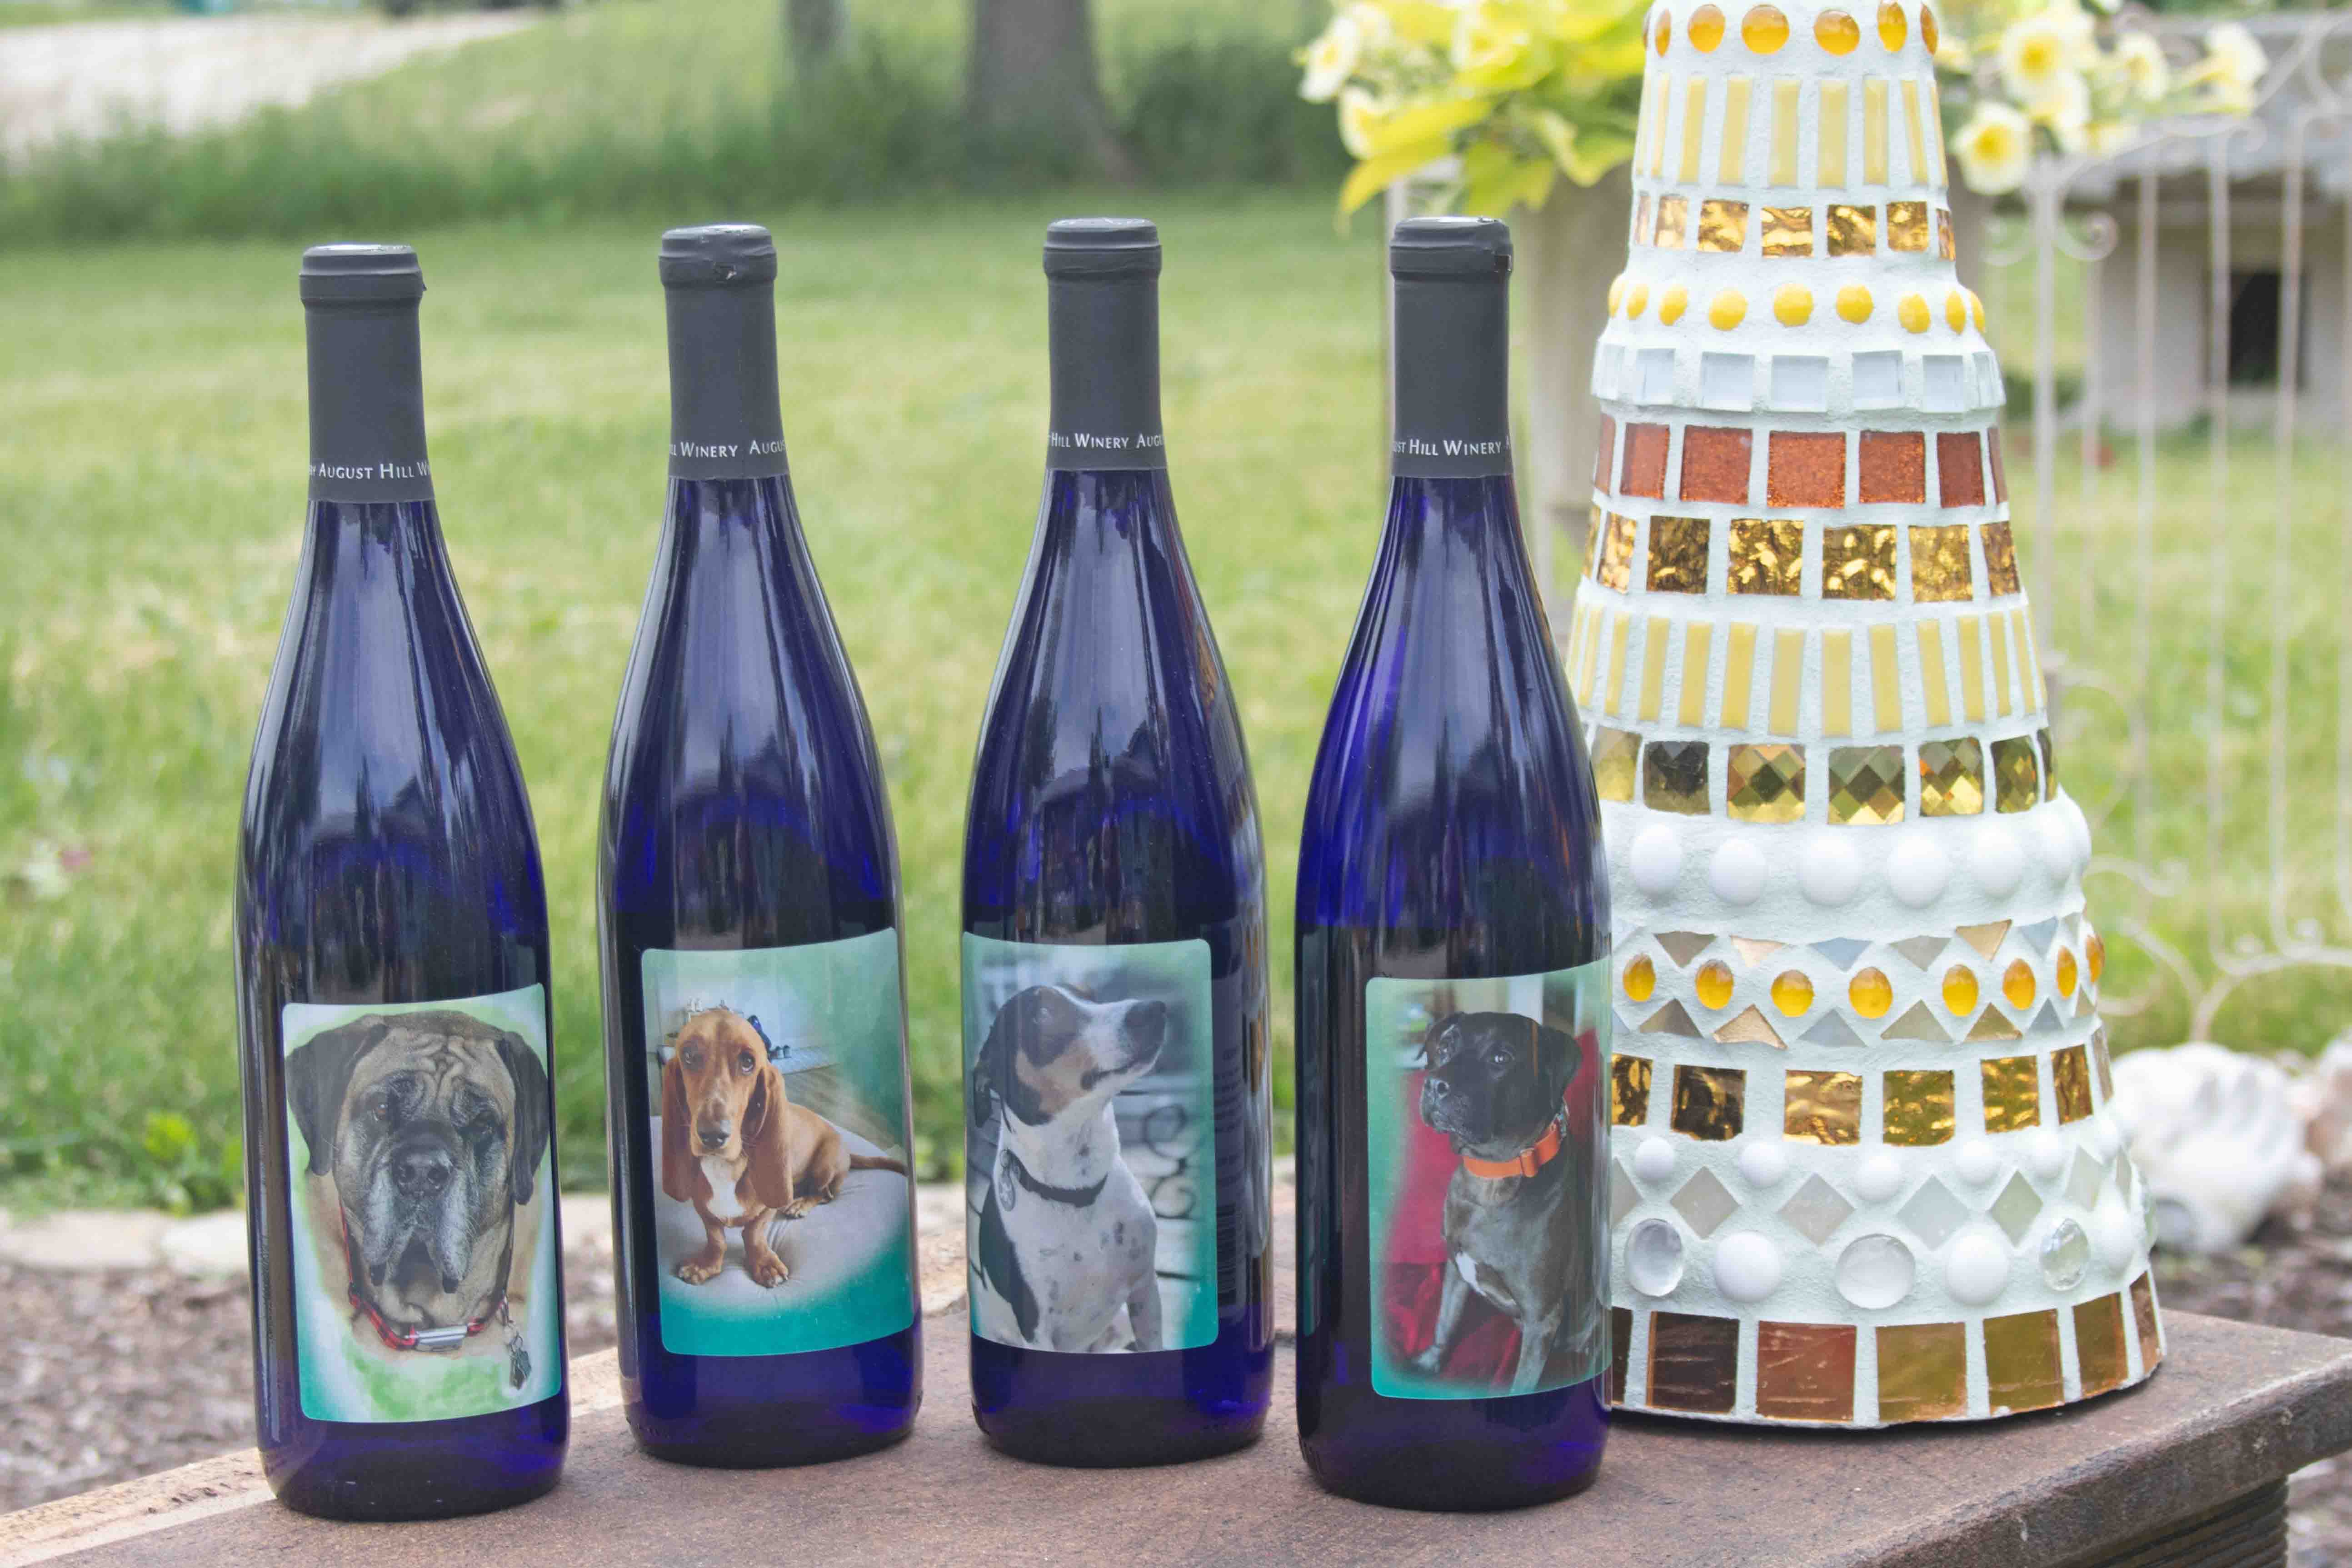 4 top votes will appear on August Hill wine labels